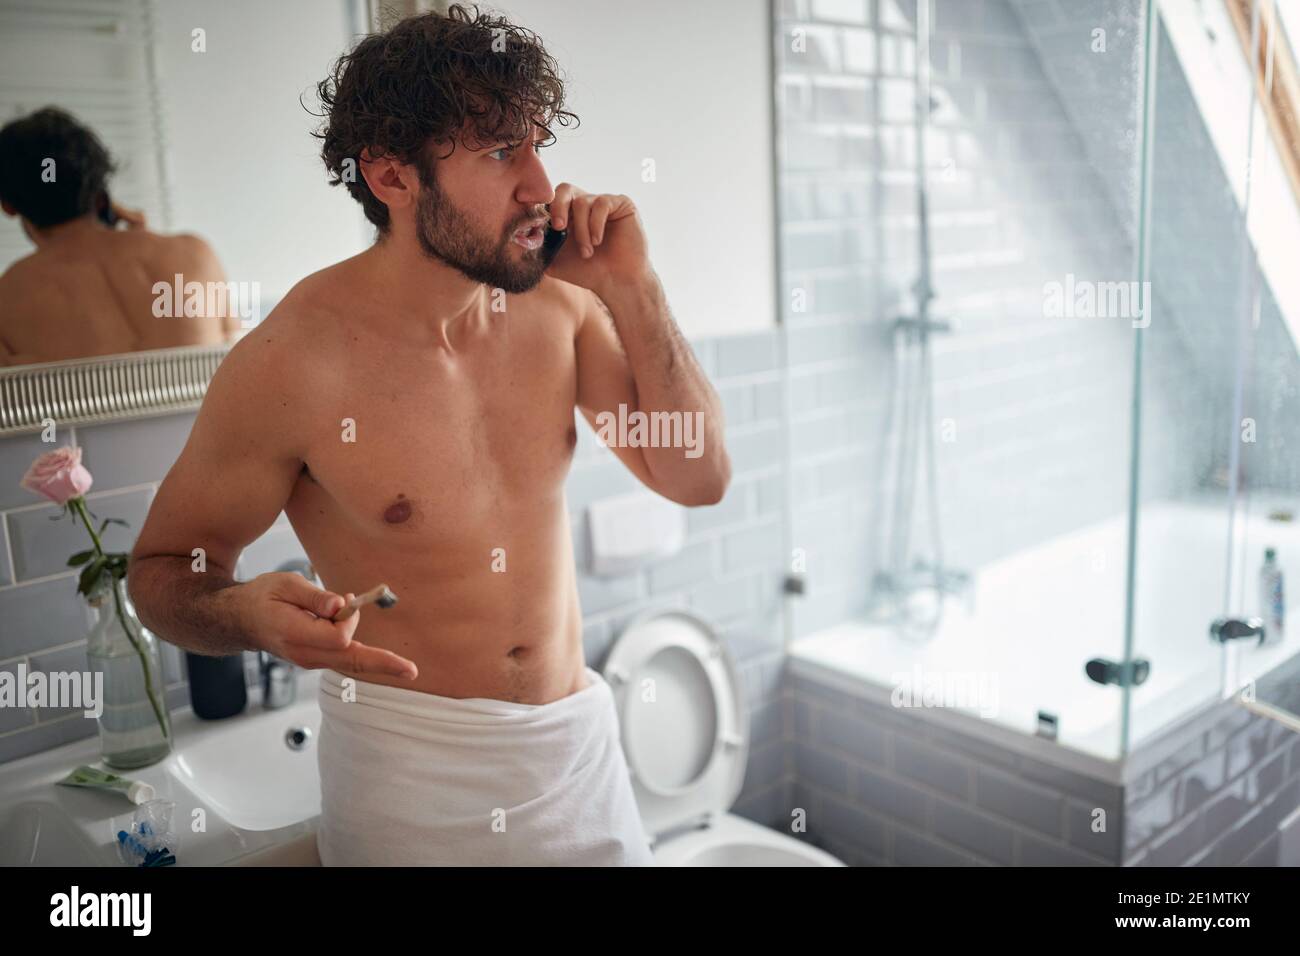 Angry topless man fighting while brushing teeth in the bathroom Stock Photo